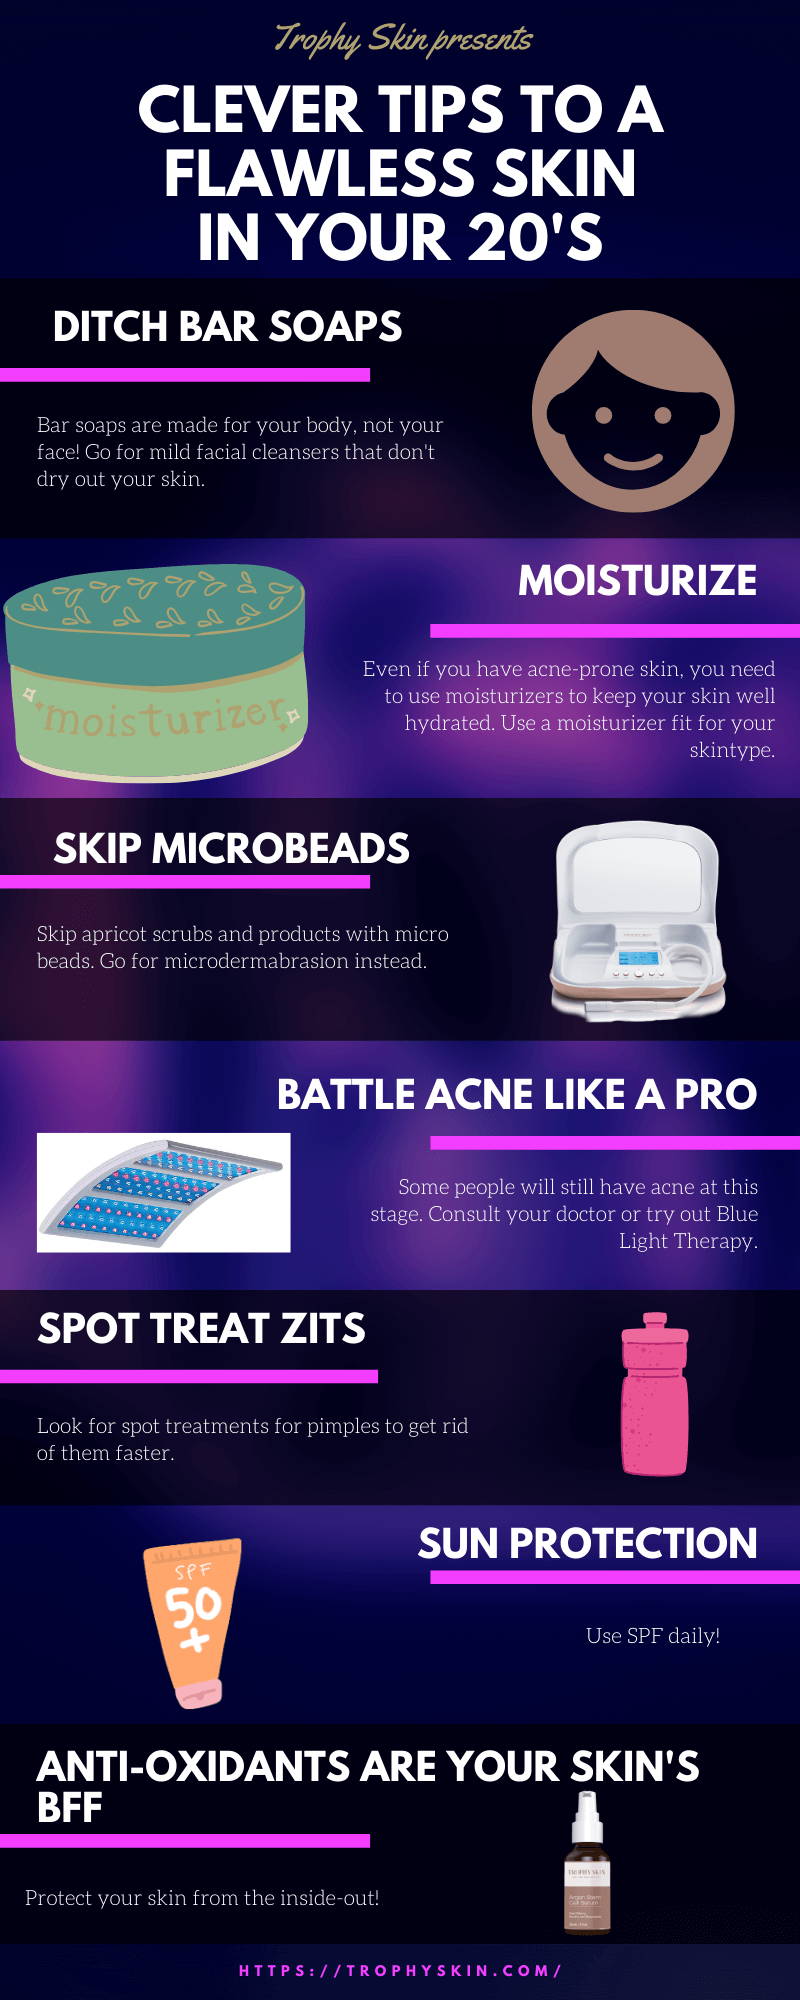 tips on how to get flawless skin on your 20s